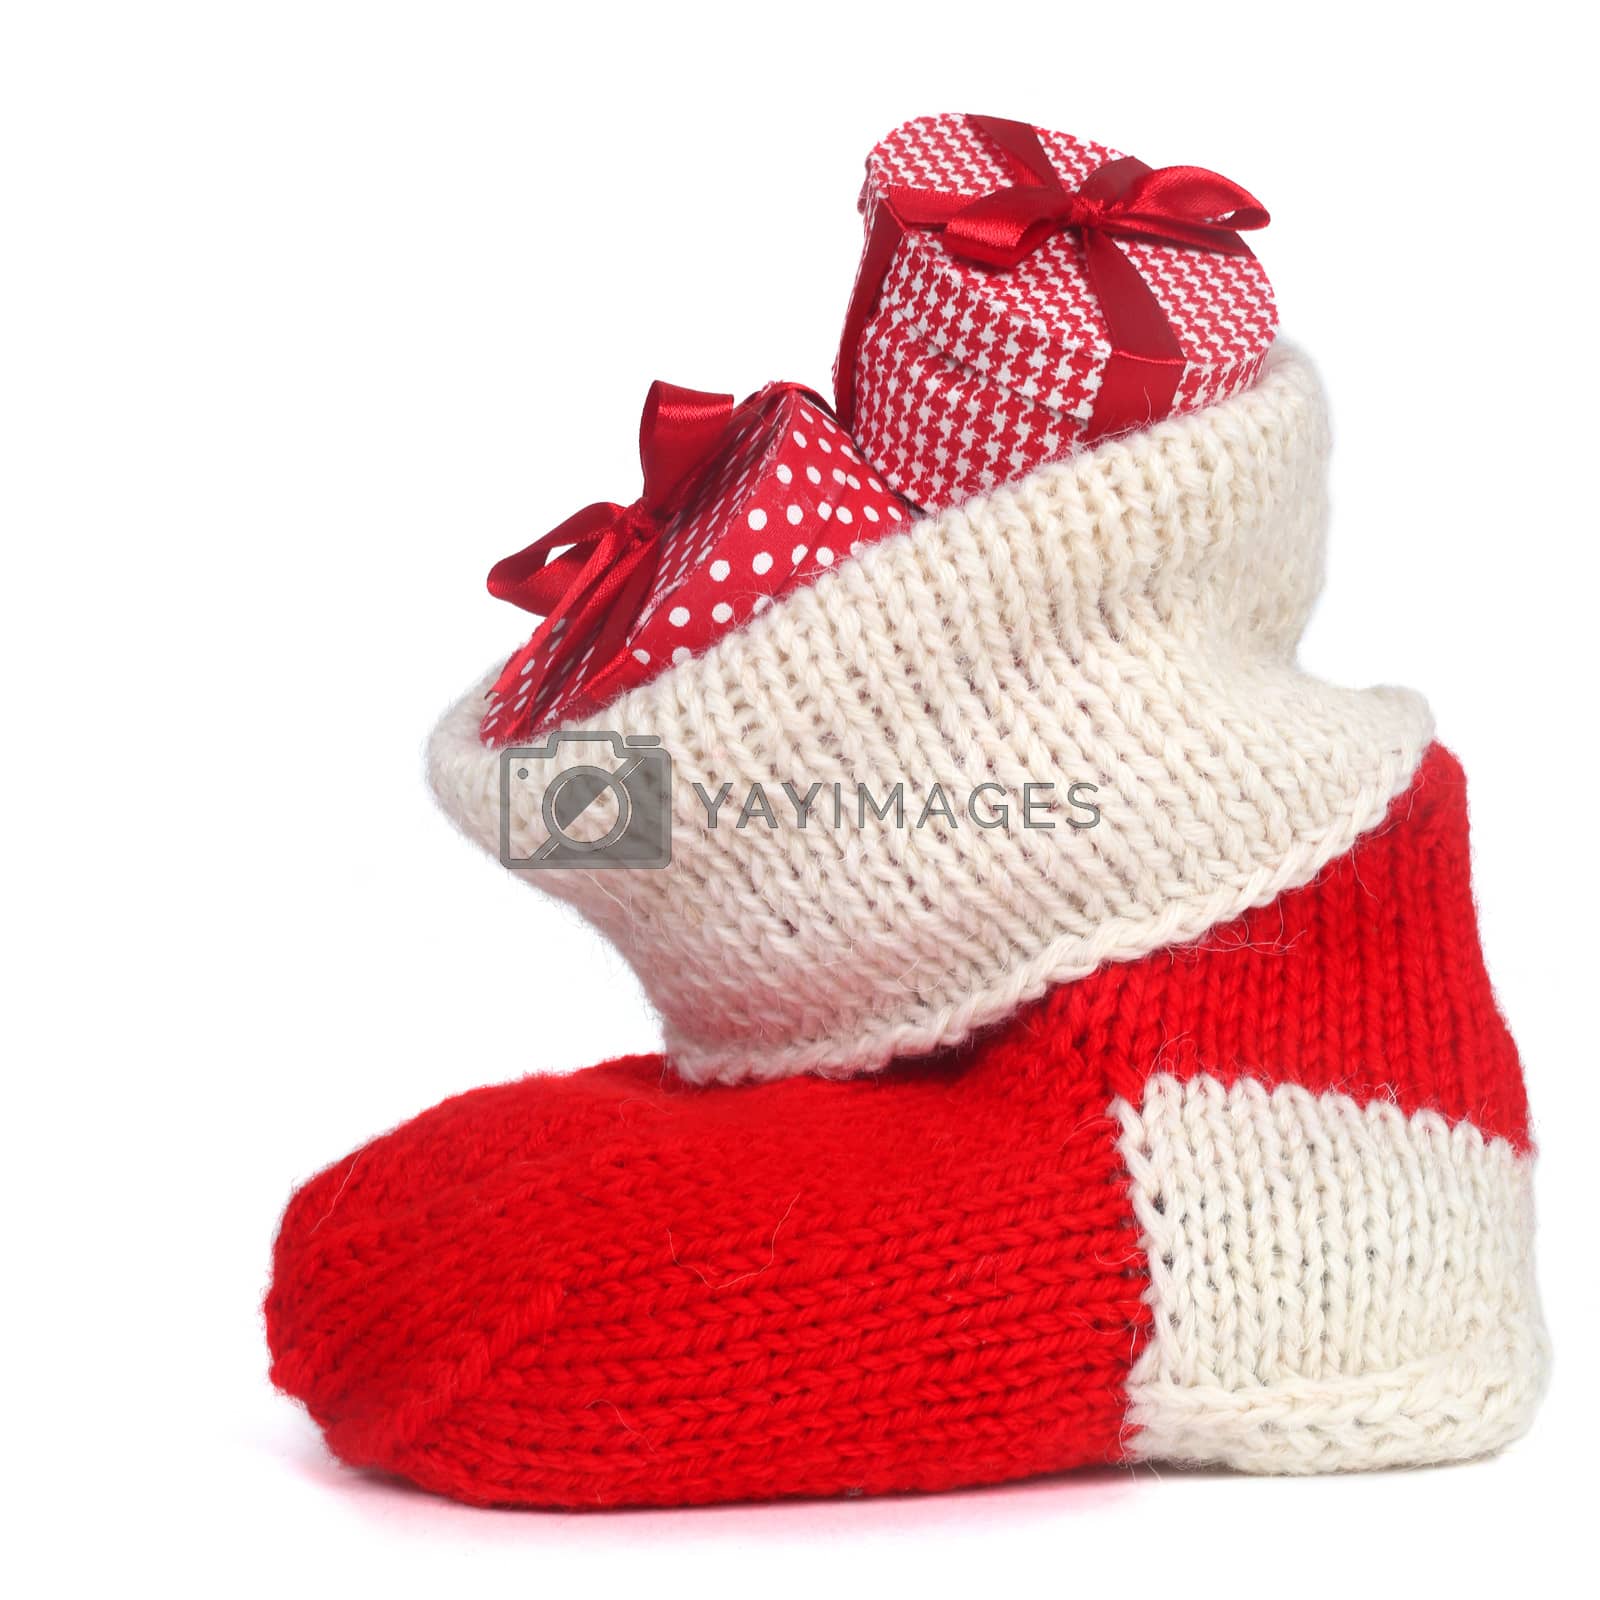 Royalty free image of Red Christmas sock by destillat